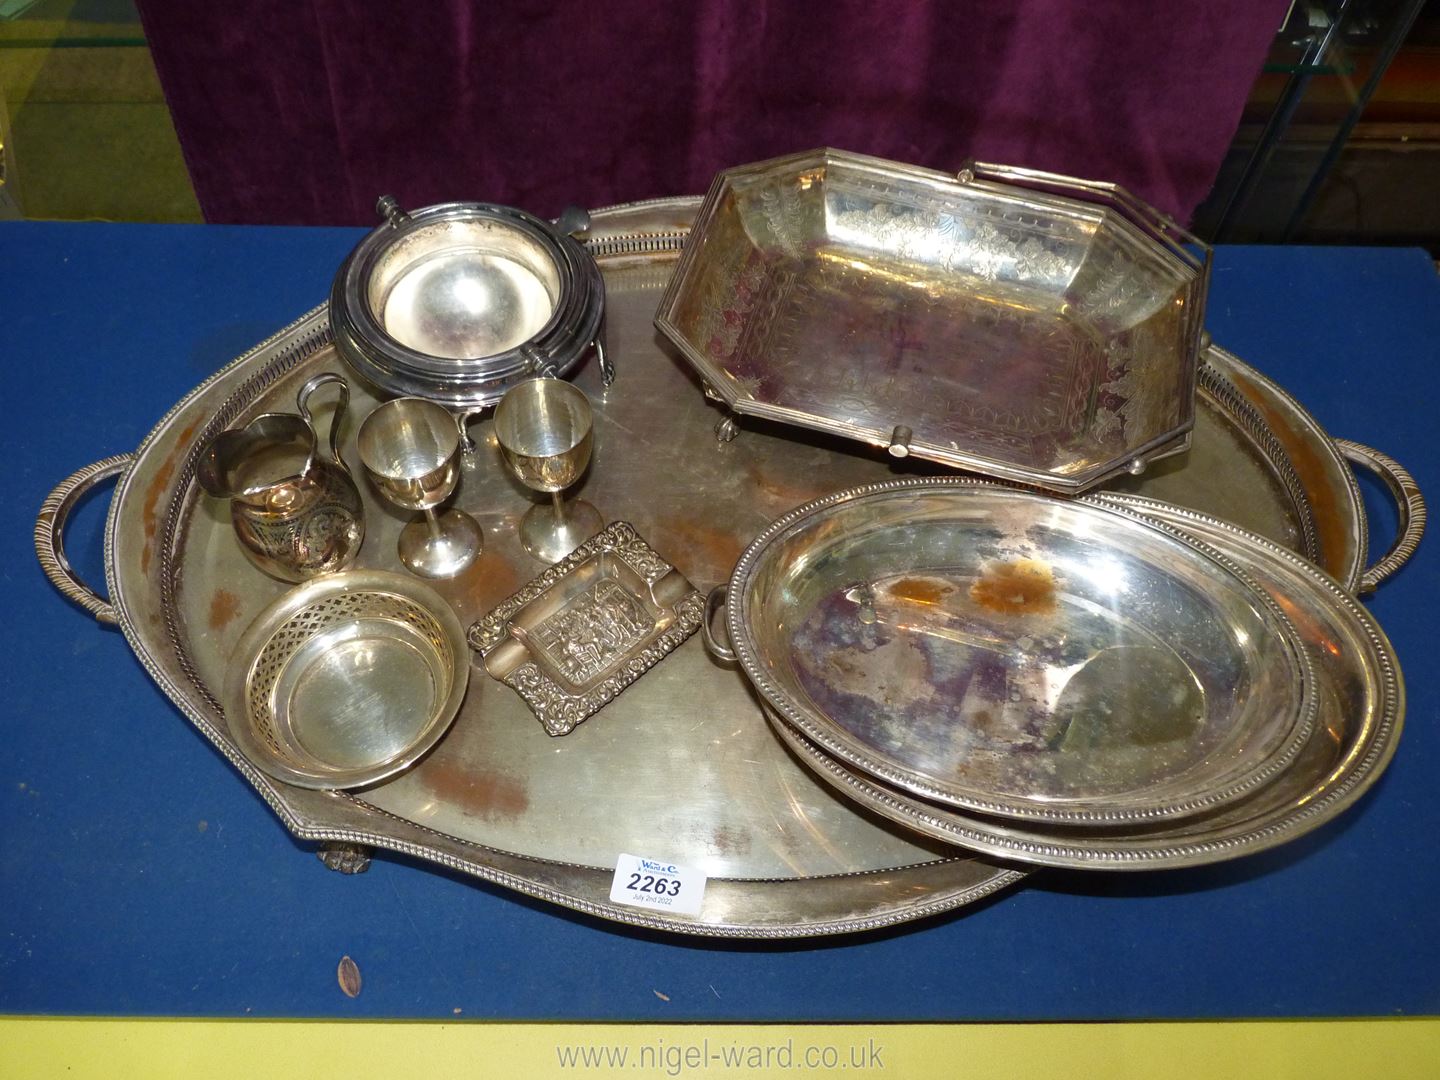 A plated bread basket, serving dish, large serving tray, ashtray, cream jug, etc.